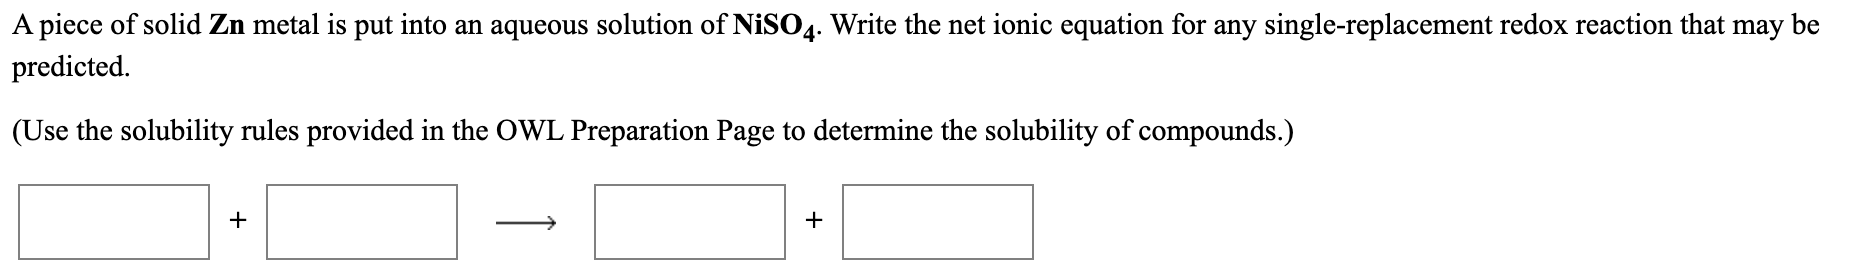 A piece of solid Zn metal is put into an aqueous solution of NiSO4. Write the net ionic equation for any single-replacement redox reaction that may
predicted.
be
